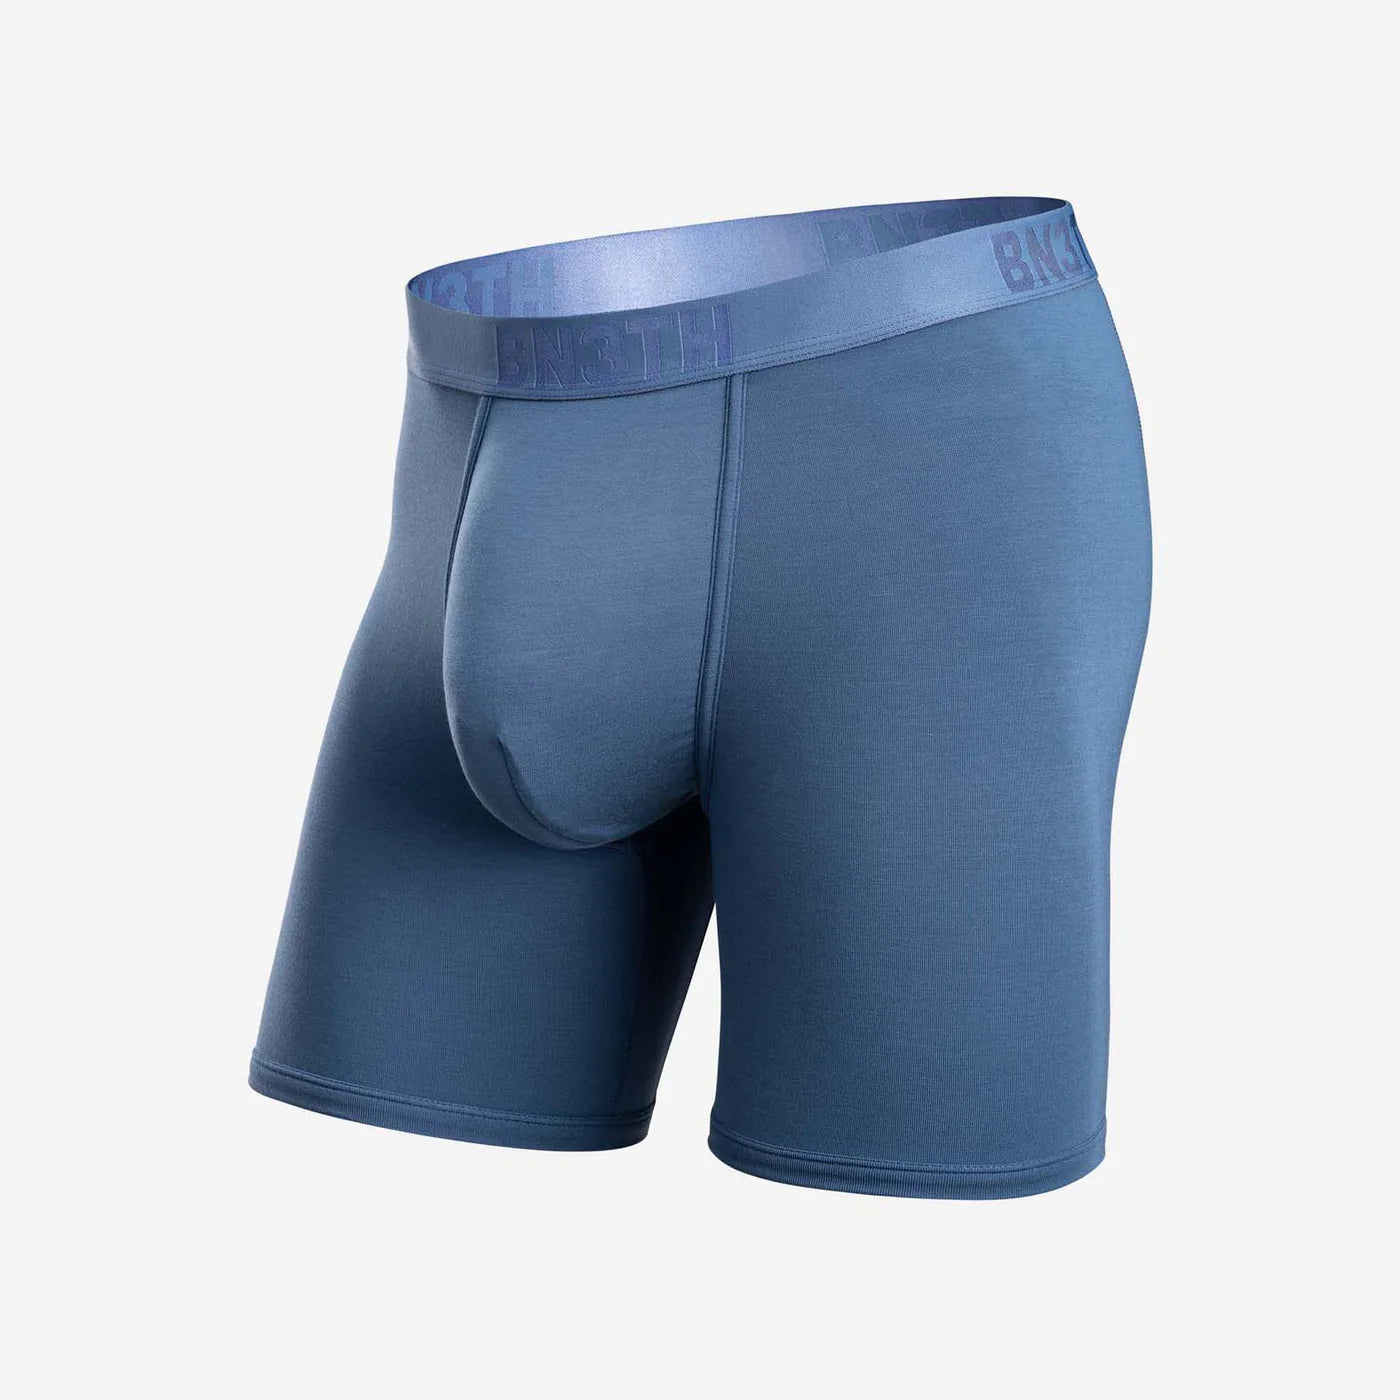 These luxury Boxer Briefs feature an ultra-soft, breathable, lightweight Tencel Modal that is sustainably sourced, guaranteed to stay smooth and keep you comfortably supported at all times. 